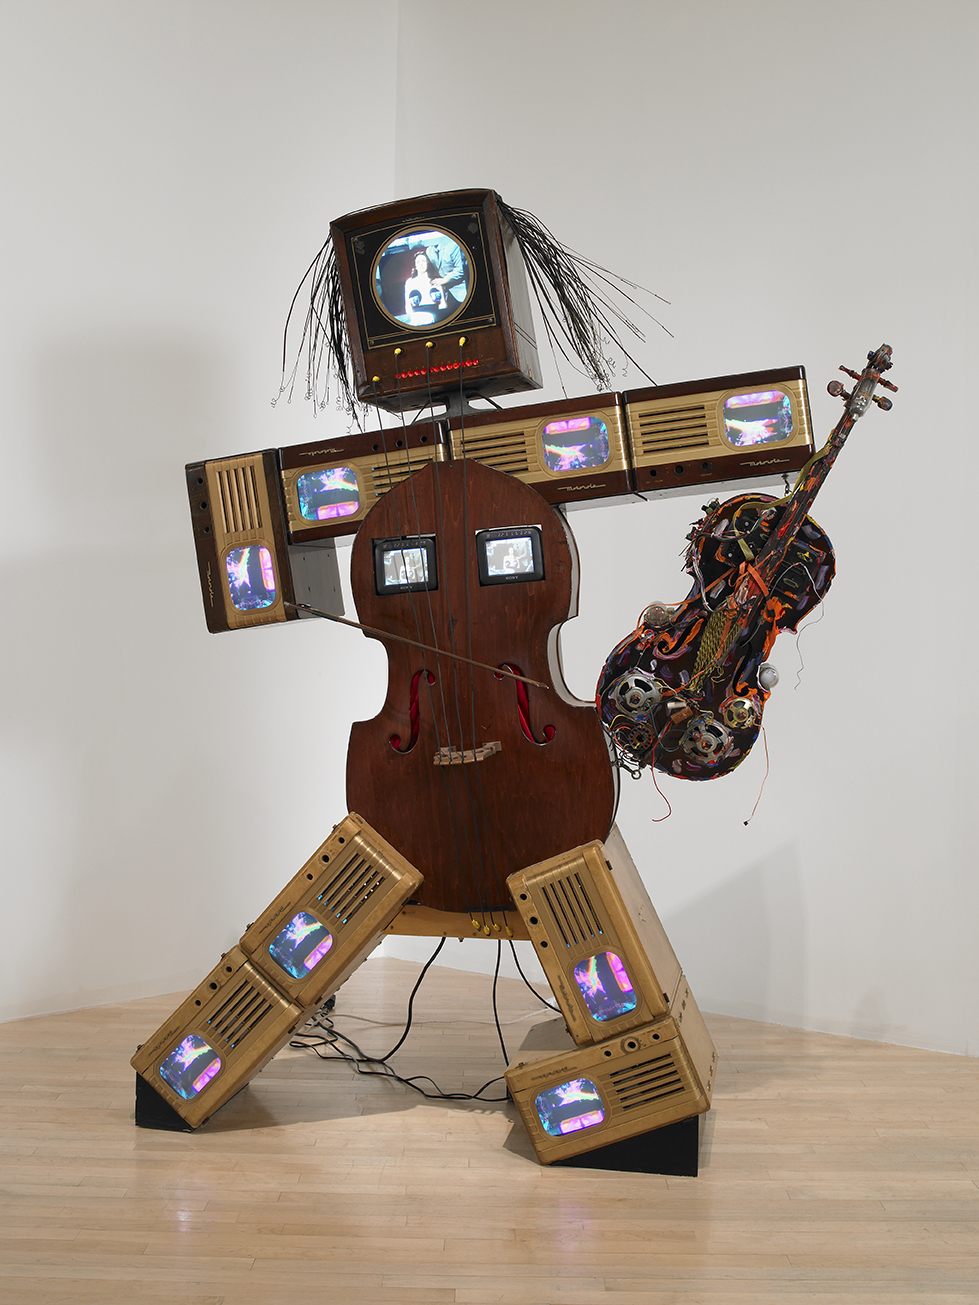 Sculpture of figure consisting of antique tv cabinets and cellos.